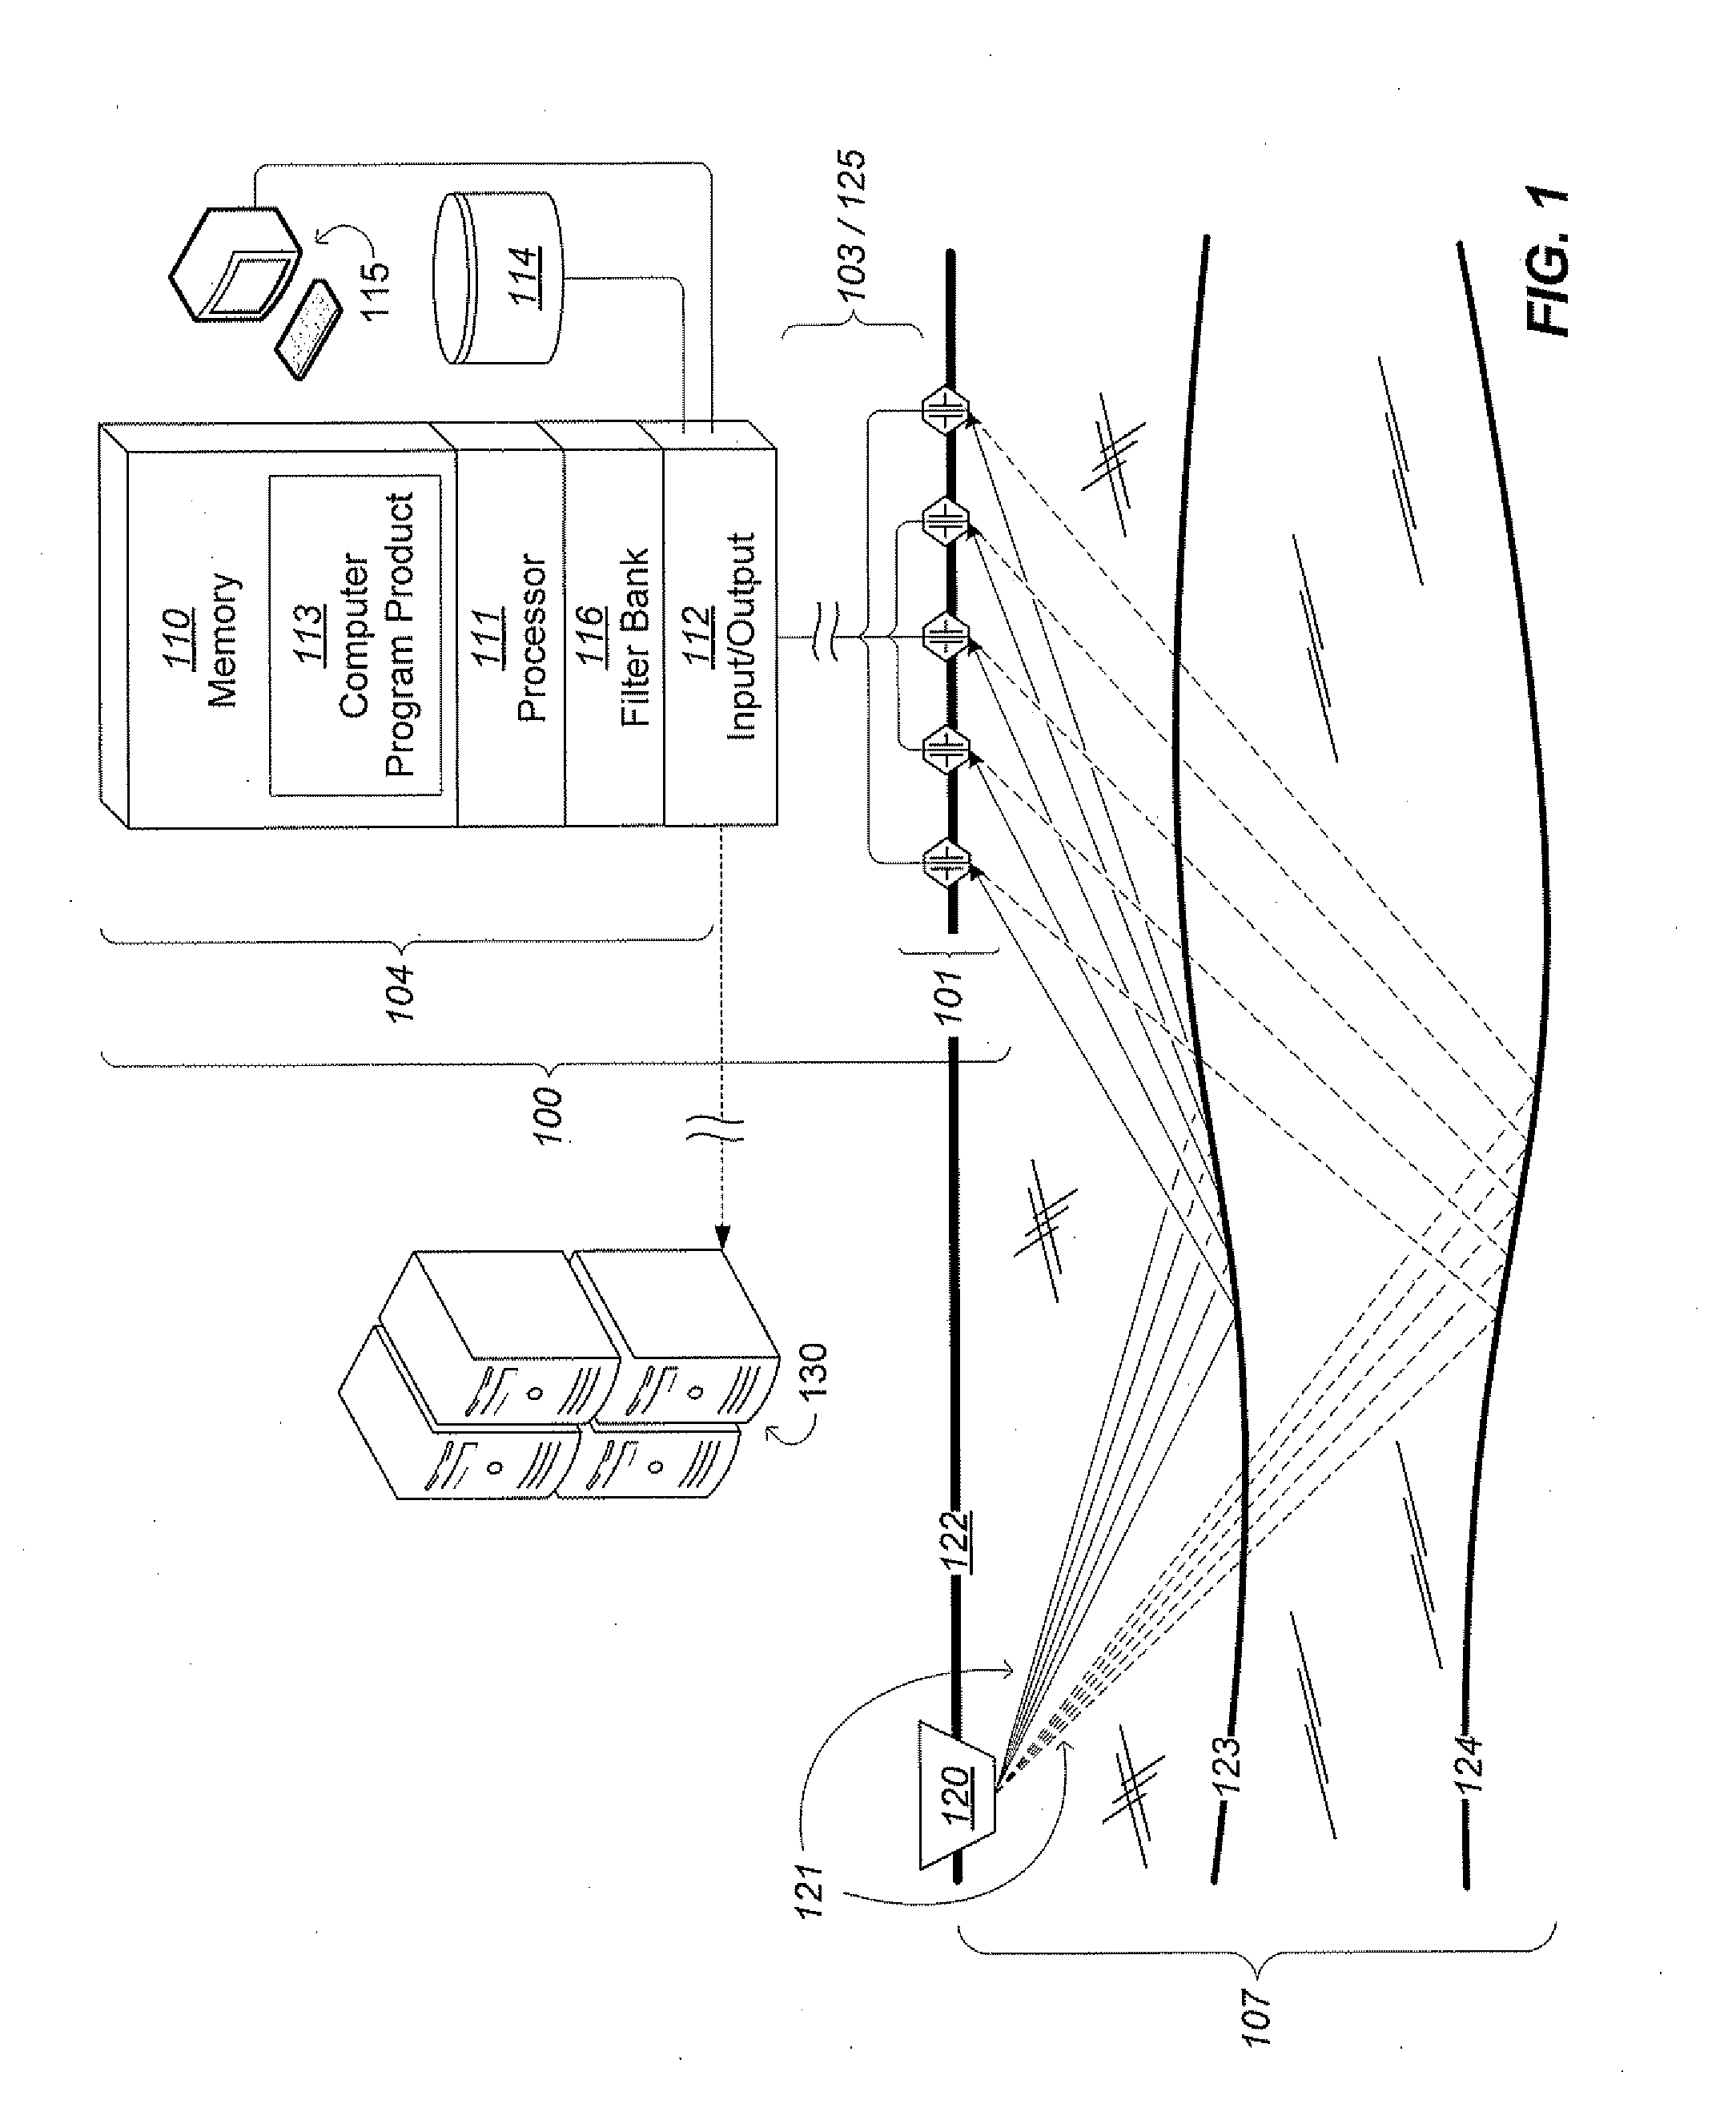 System, machine, and computer-readable storage medium for forming an enhanced seismic trace using a virtual seismic array